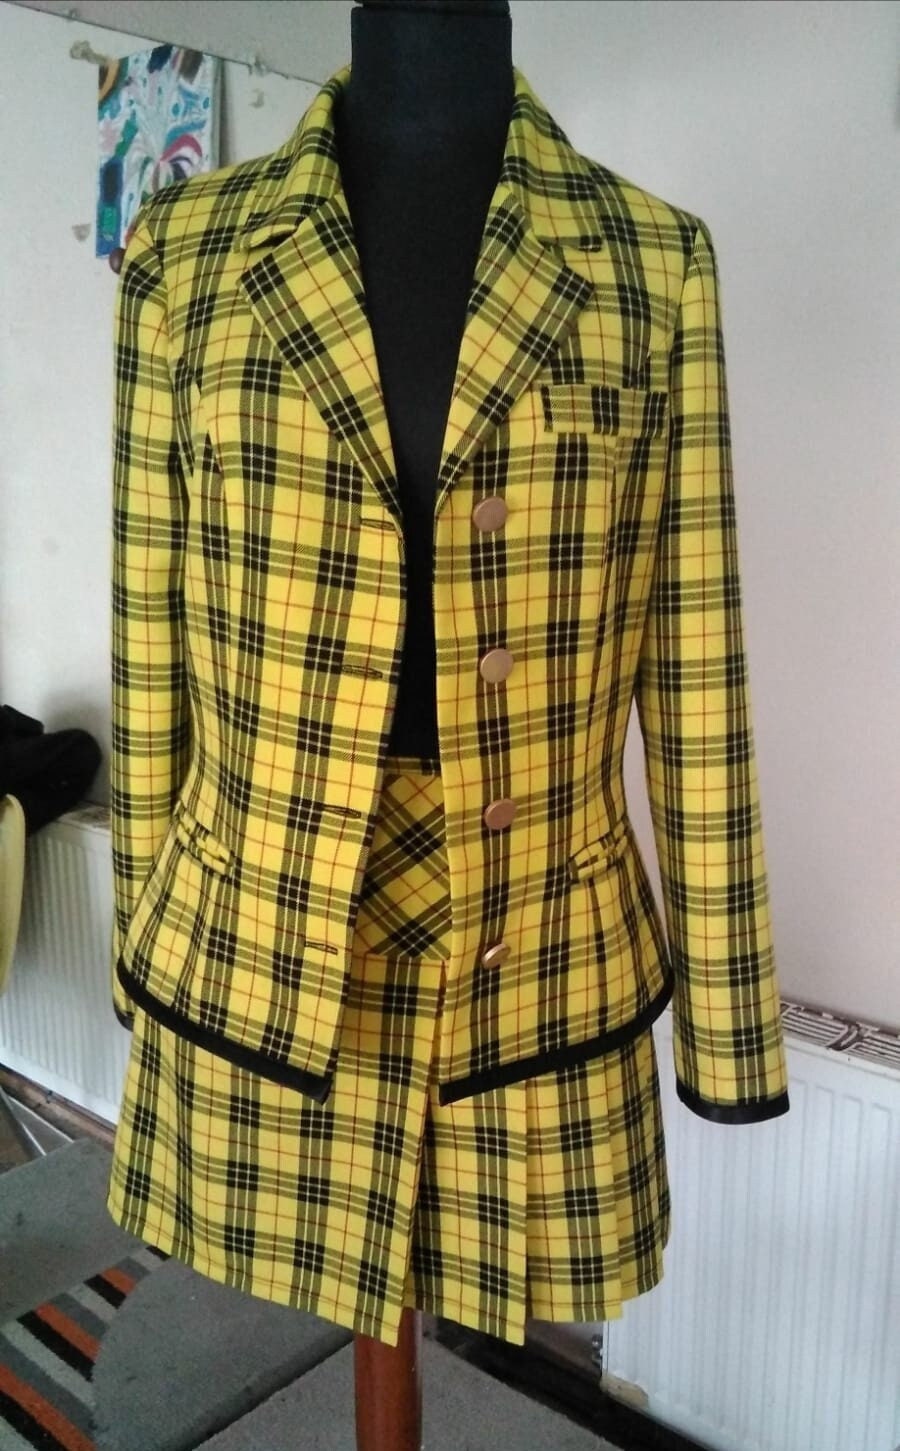  Cosplay.fm Women's Cher Yellow Plaid Tartan Outfit